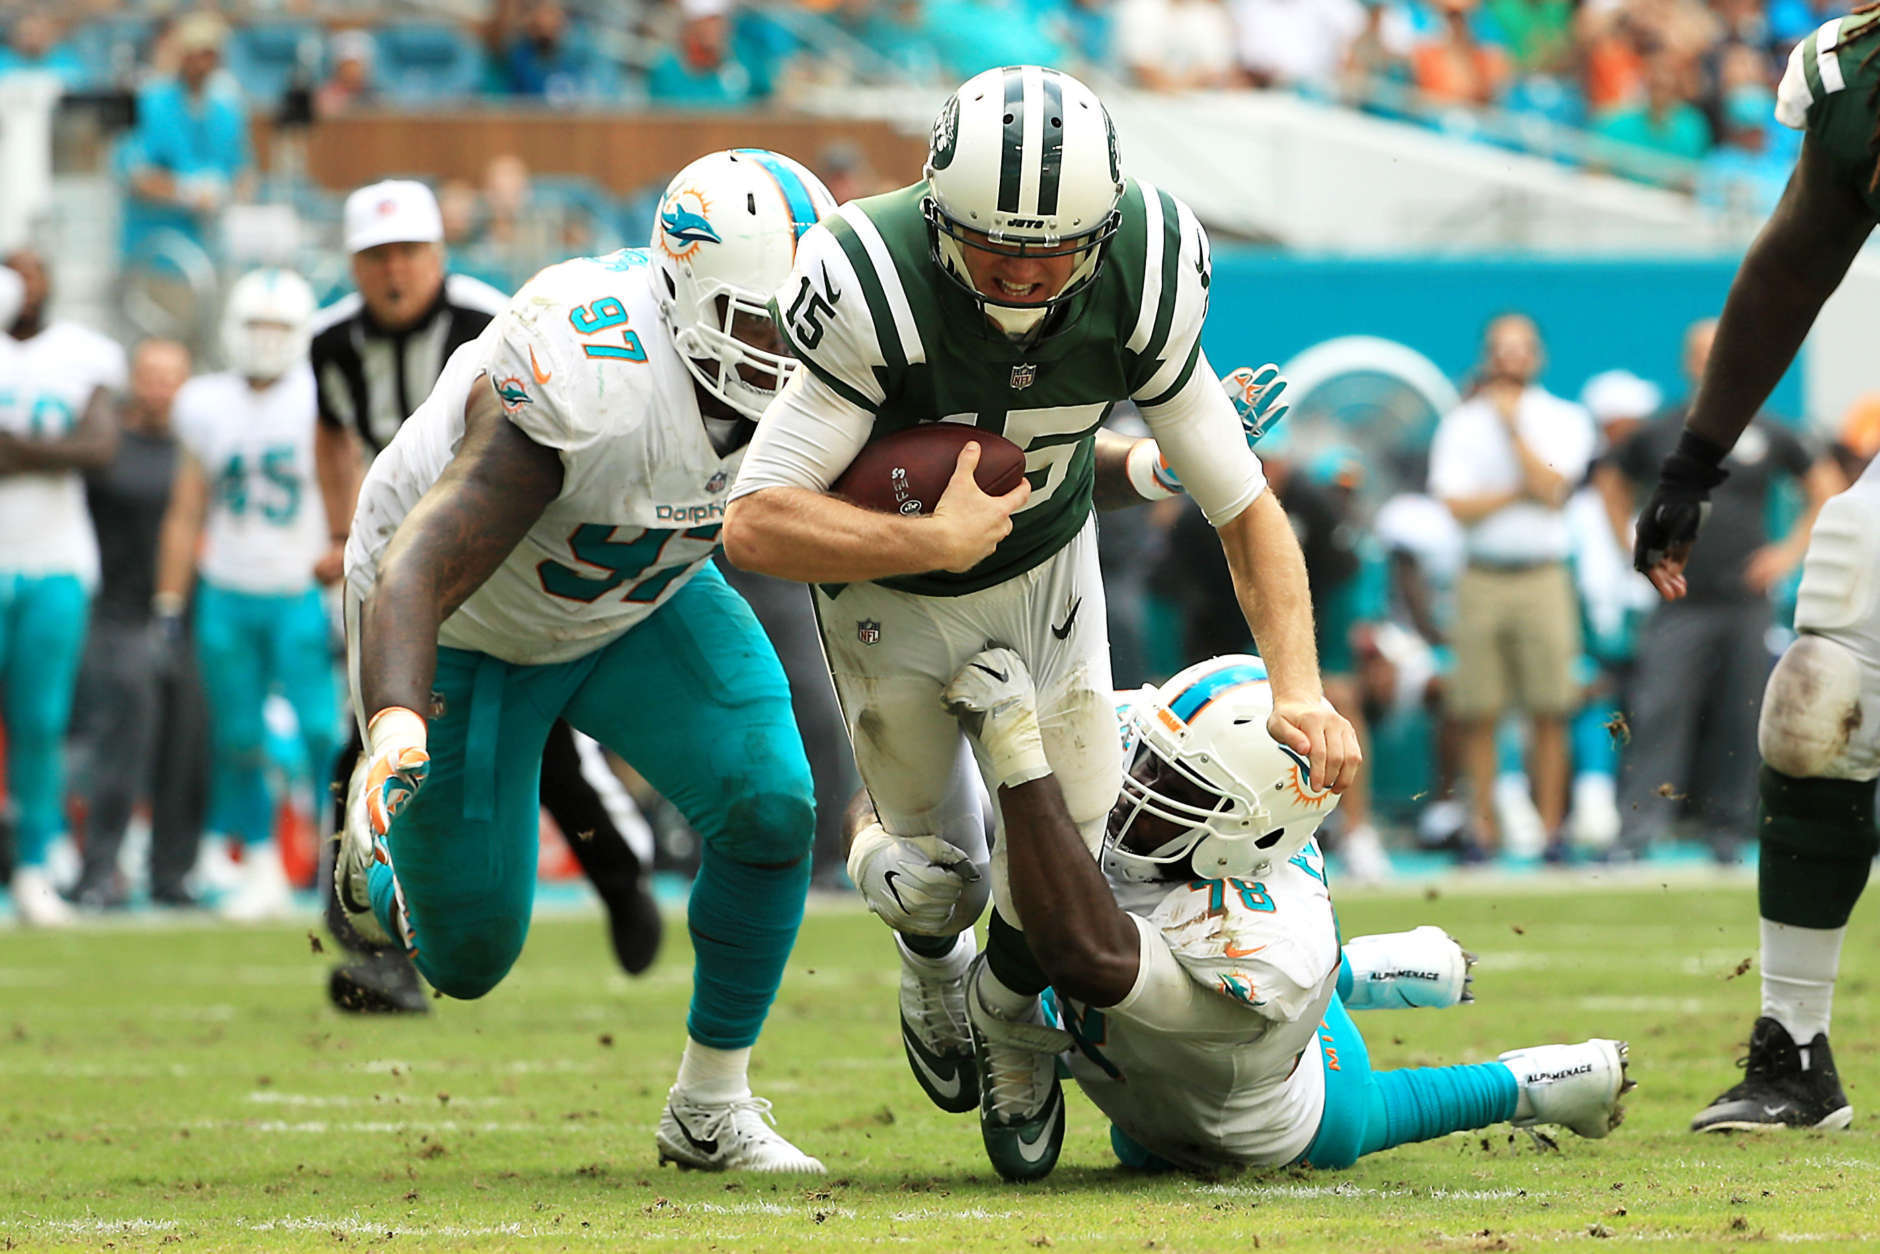 MIAMI GARDENS, FL - OCTOBER 22:  Josh McCown #15 of the New York Jets tackled by Jordan Phillips #97 and Terrence Fede #78 of the Miami Dolphins during the third quarter at Hard Rock Stadium on October 22, 2017 in Miami Gardens, Florida.  (Photo by Mike Ehrmann/Getty Images)